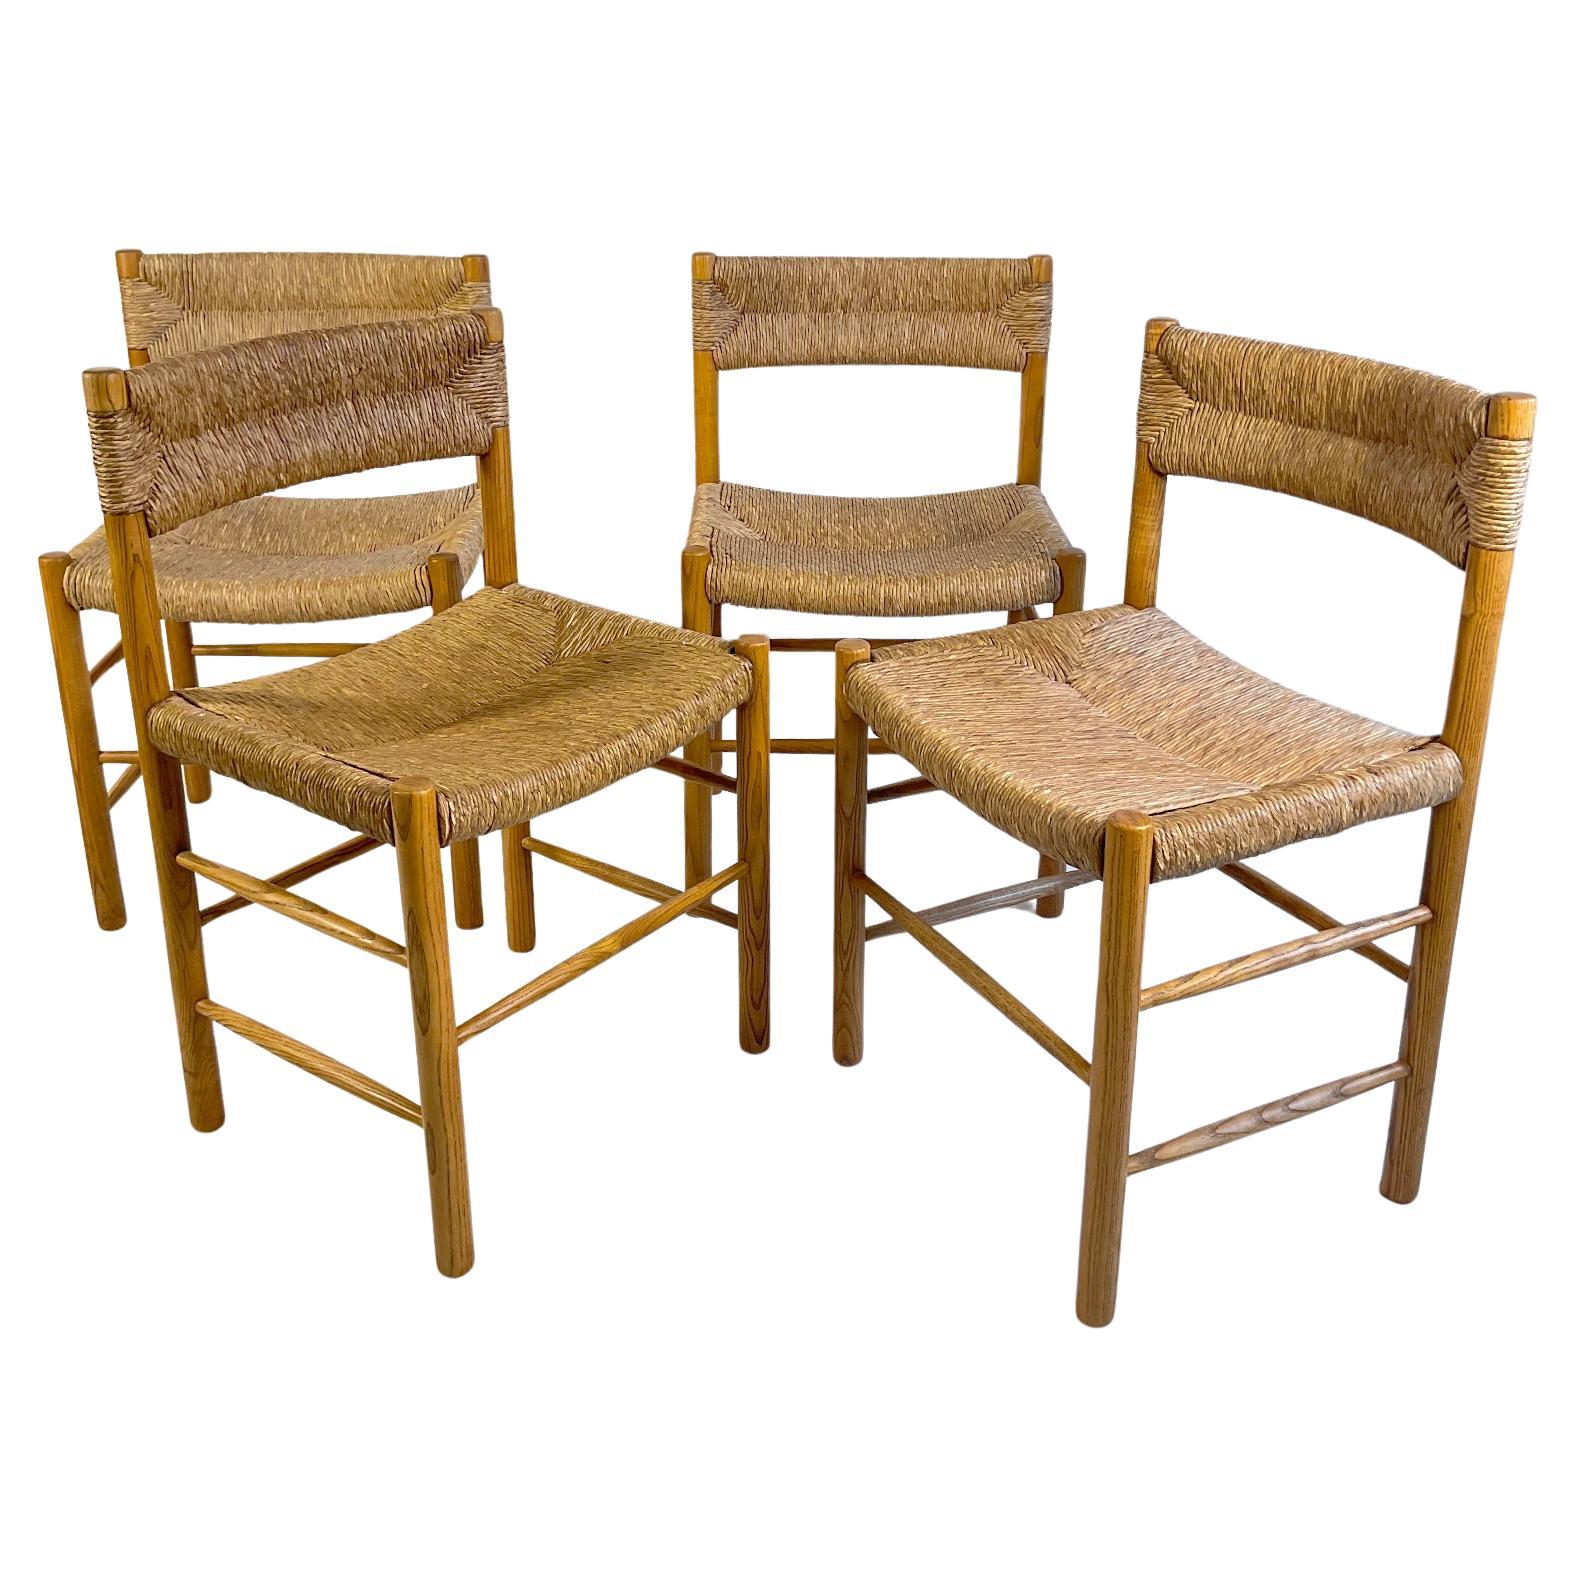 Set of Four Dordogne Chairs by Robert Sentou for Charlotte Perriand France 1960s For Sale